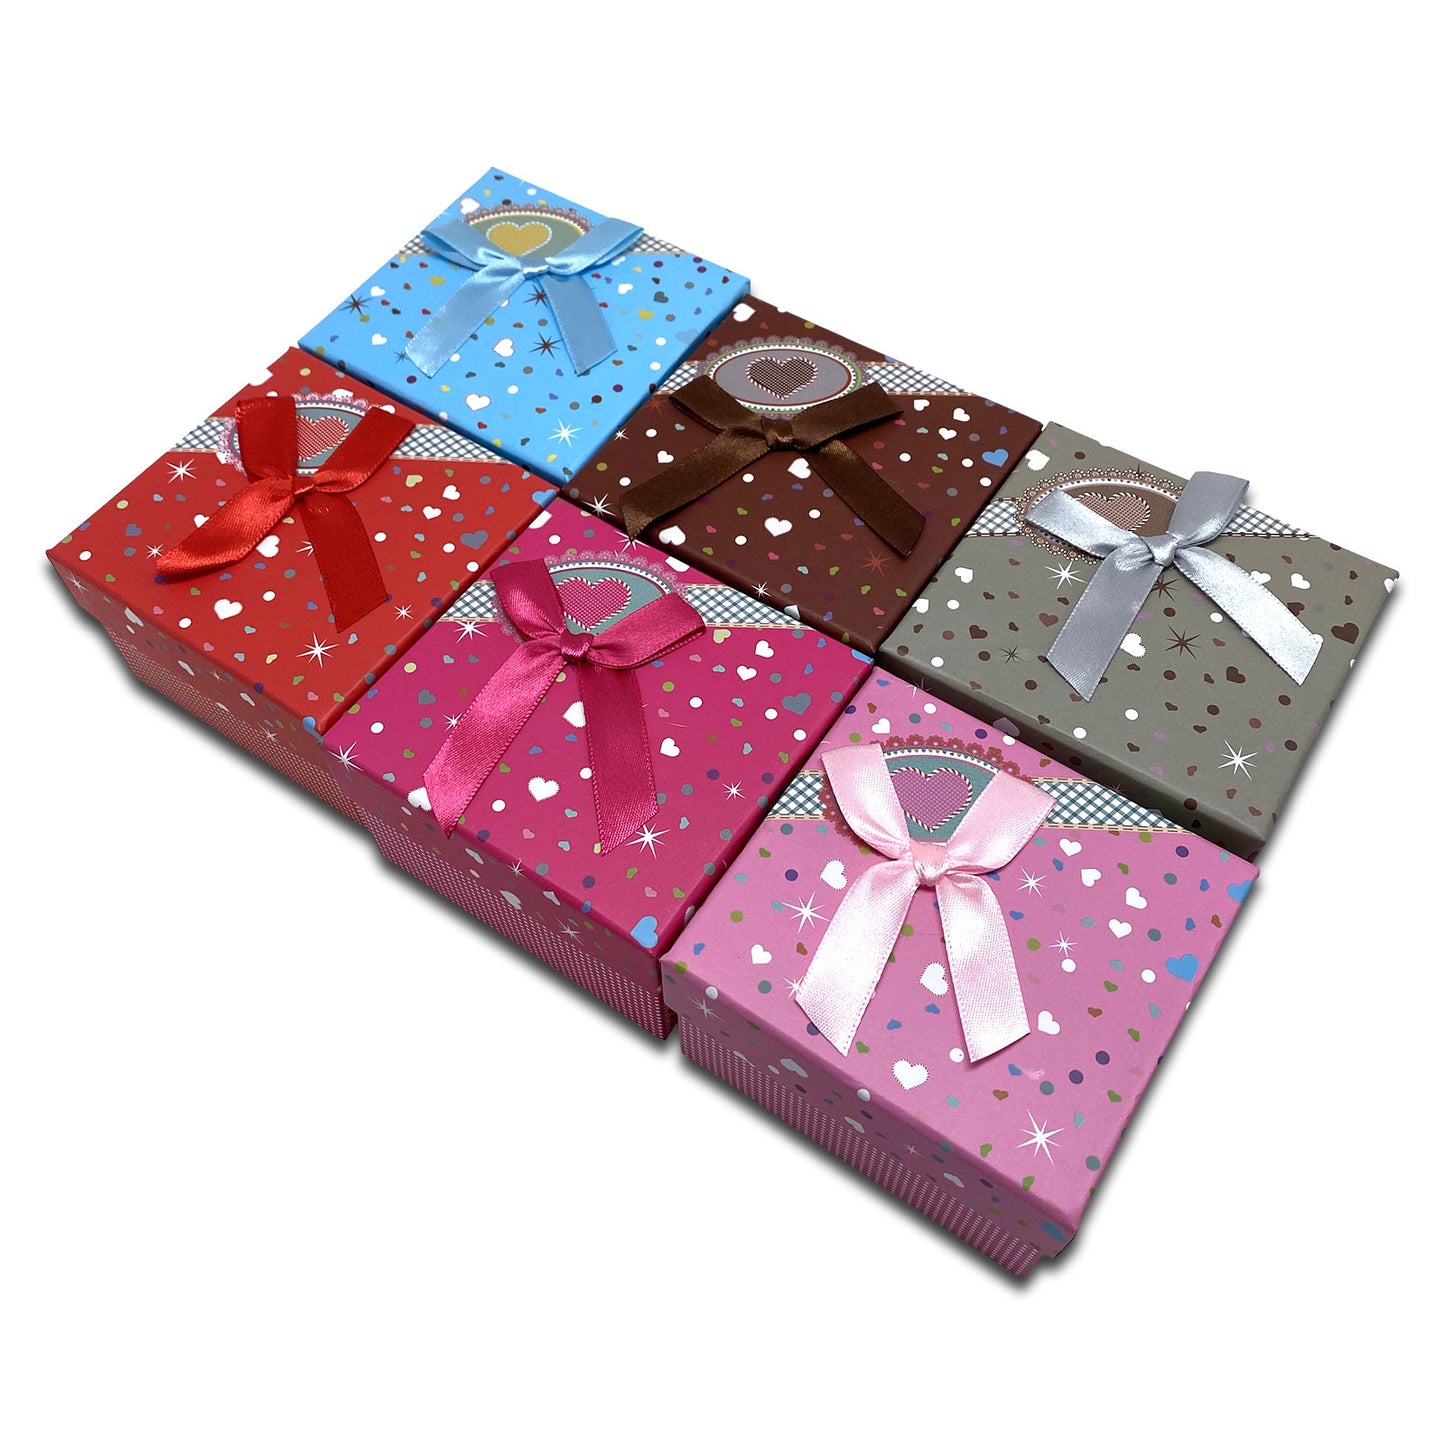 3 1/4" x 3 1/4" 6-Pack of Assorted Color Cardboard Watch Bracelet Ribbon Bow Jewelry Boxes